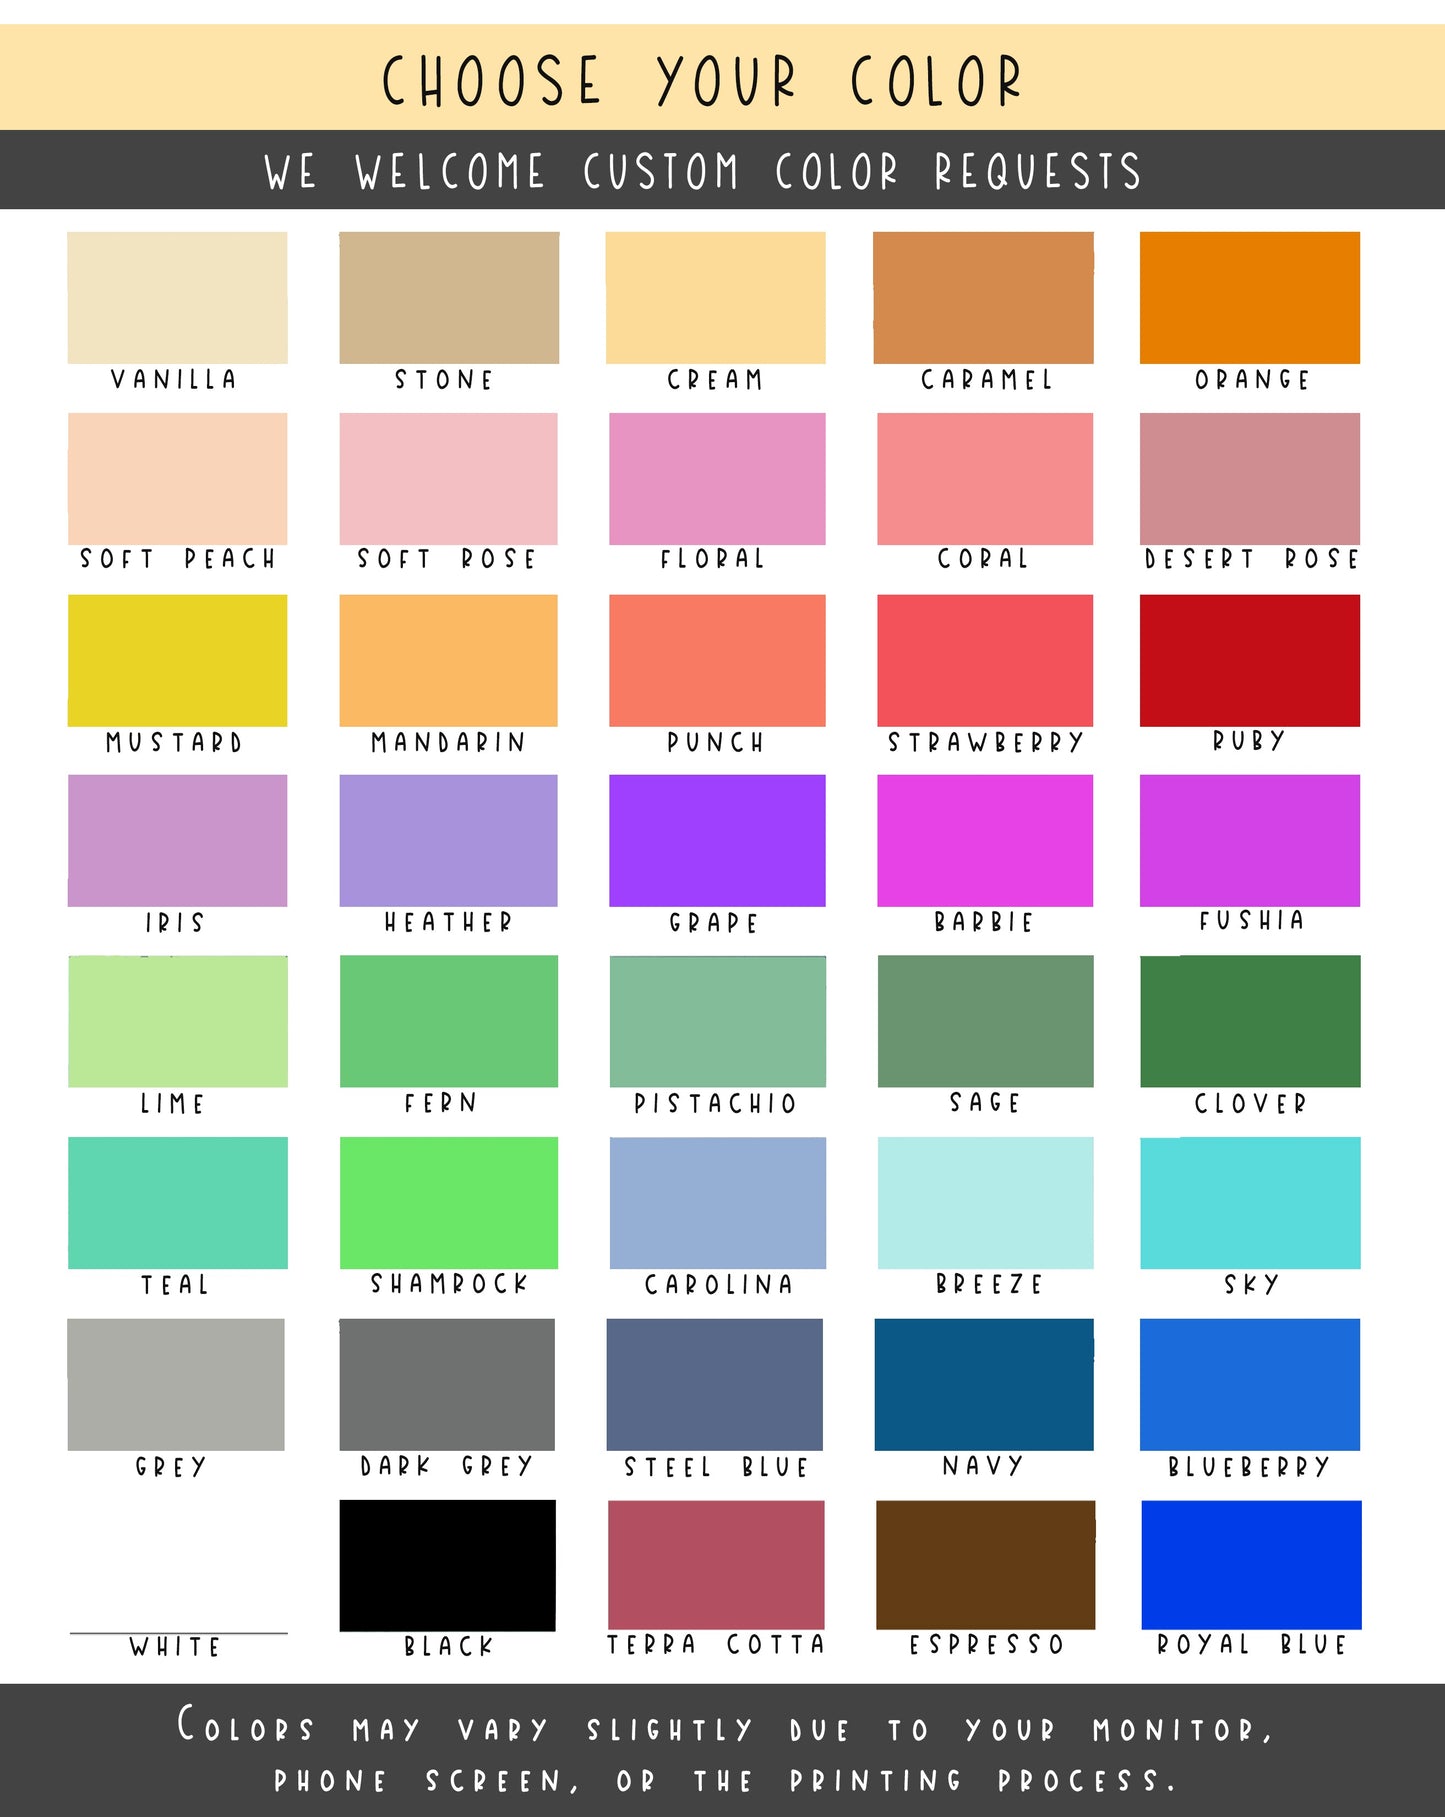 custom colors for your personalized blanket, custom name blanket colors, choose your custom color blanket with name